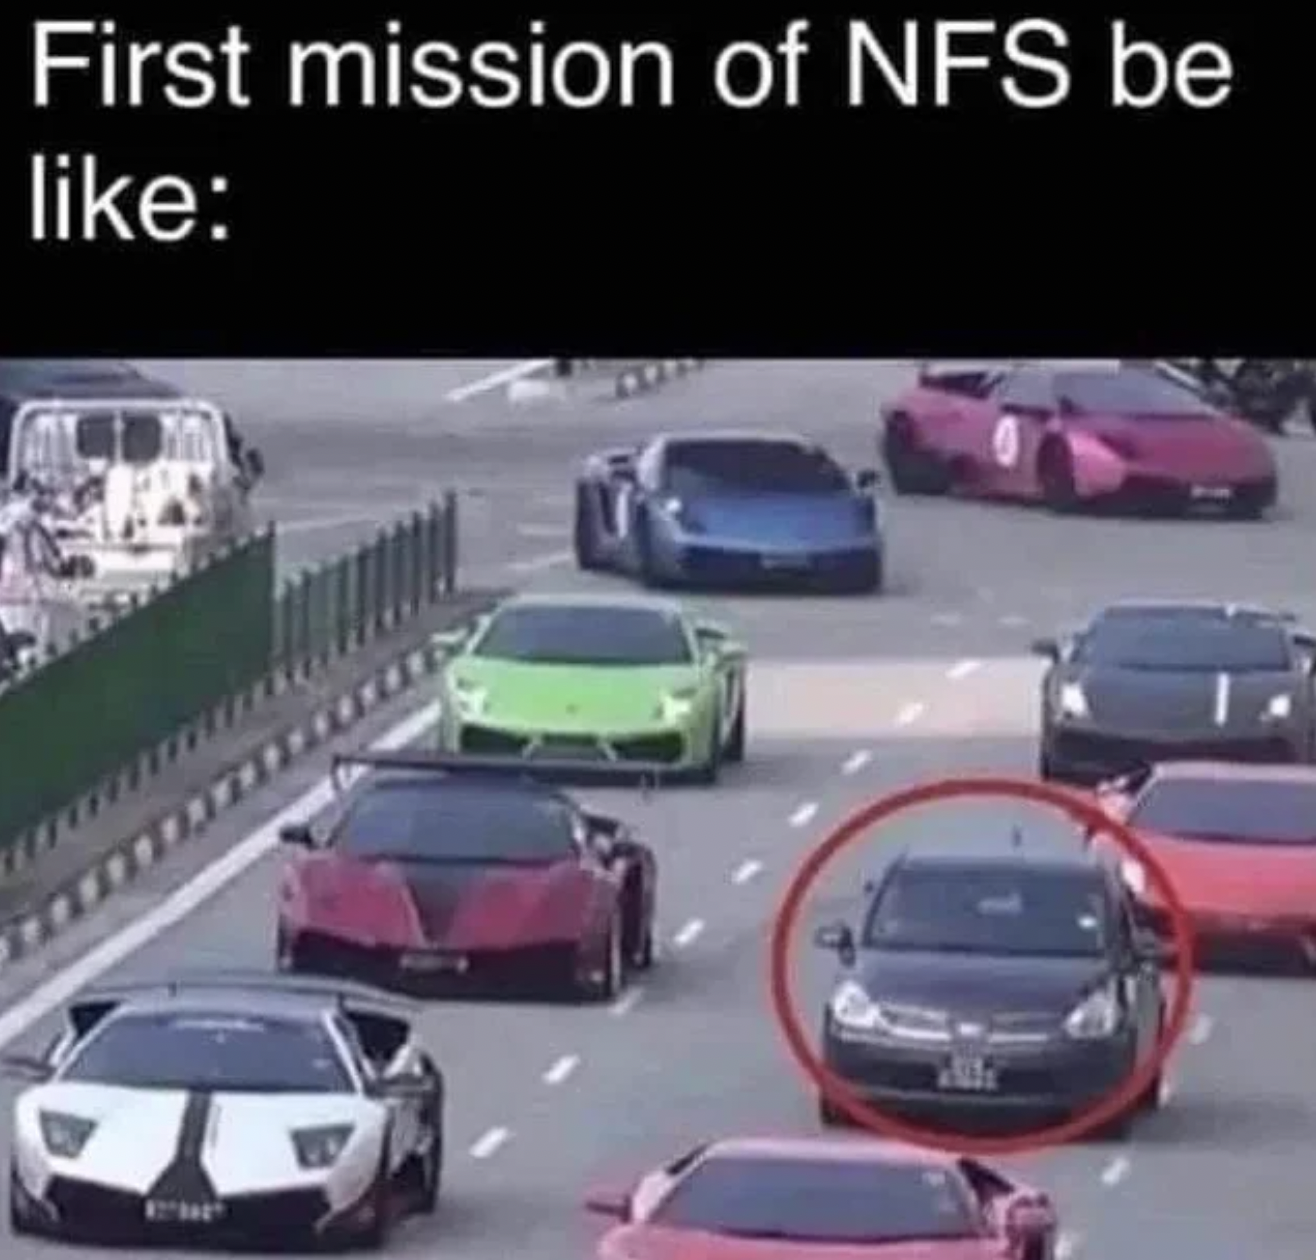 Gaming memes - need for speed memes - First mission of Nfs be